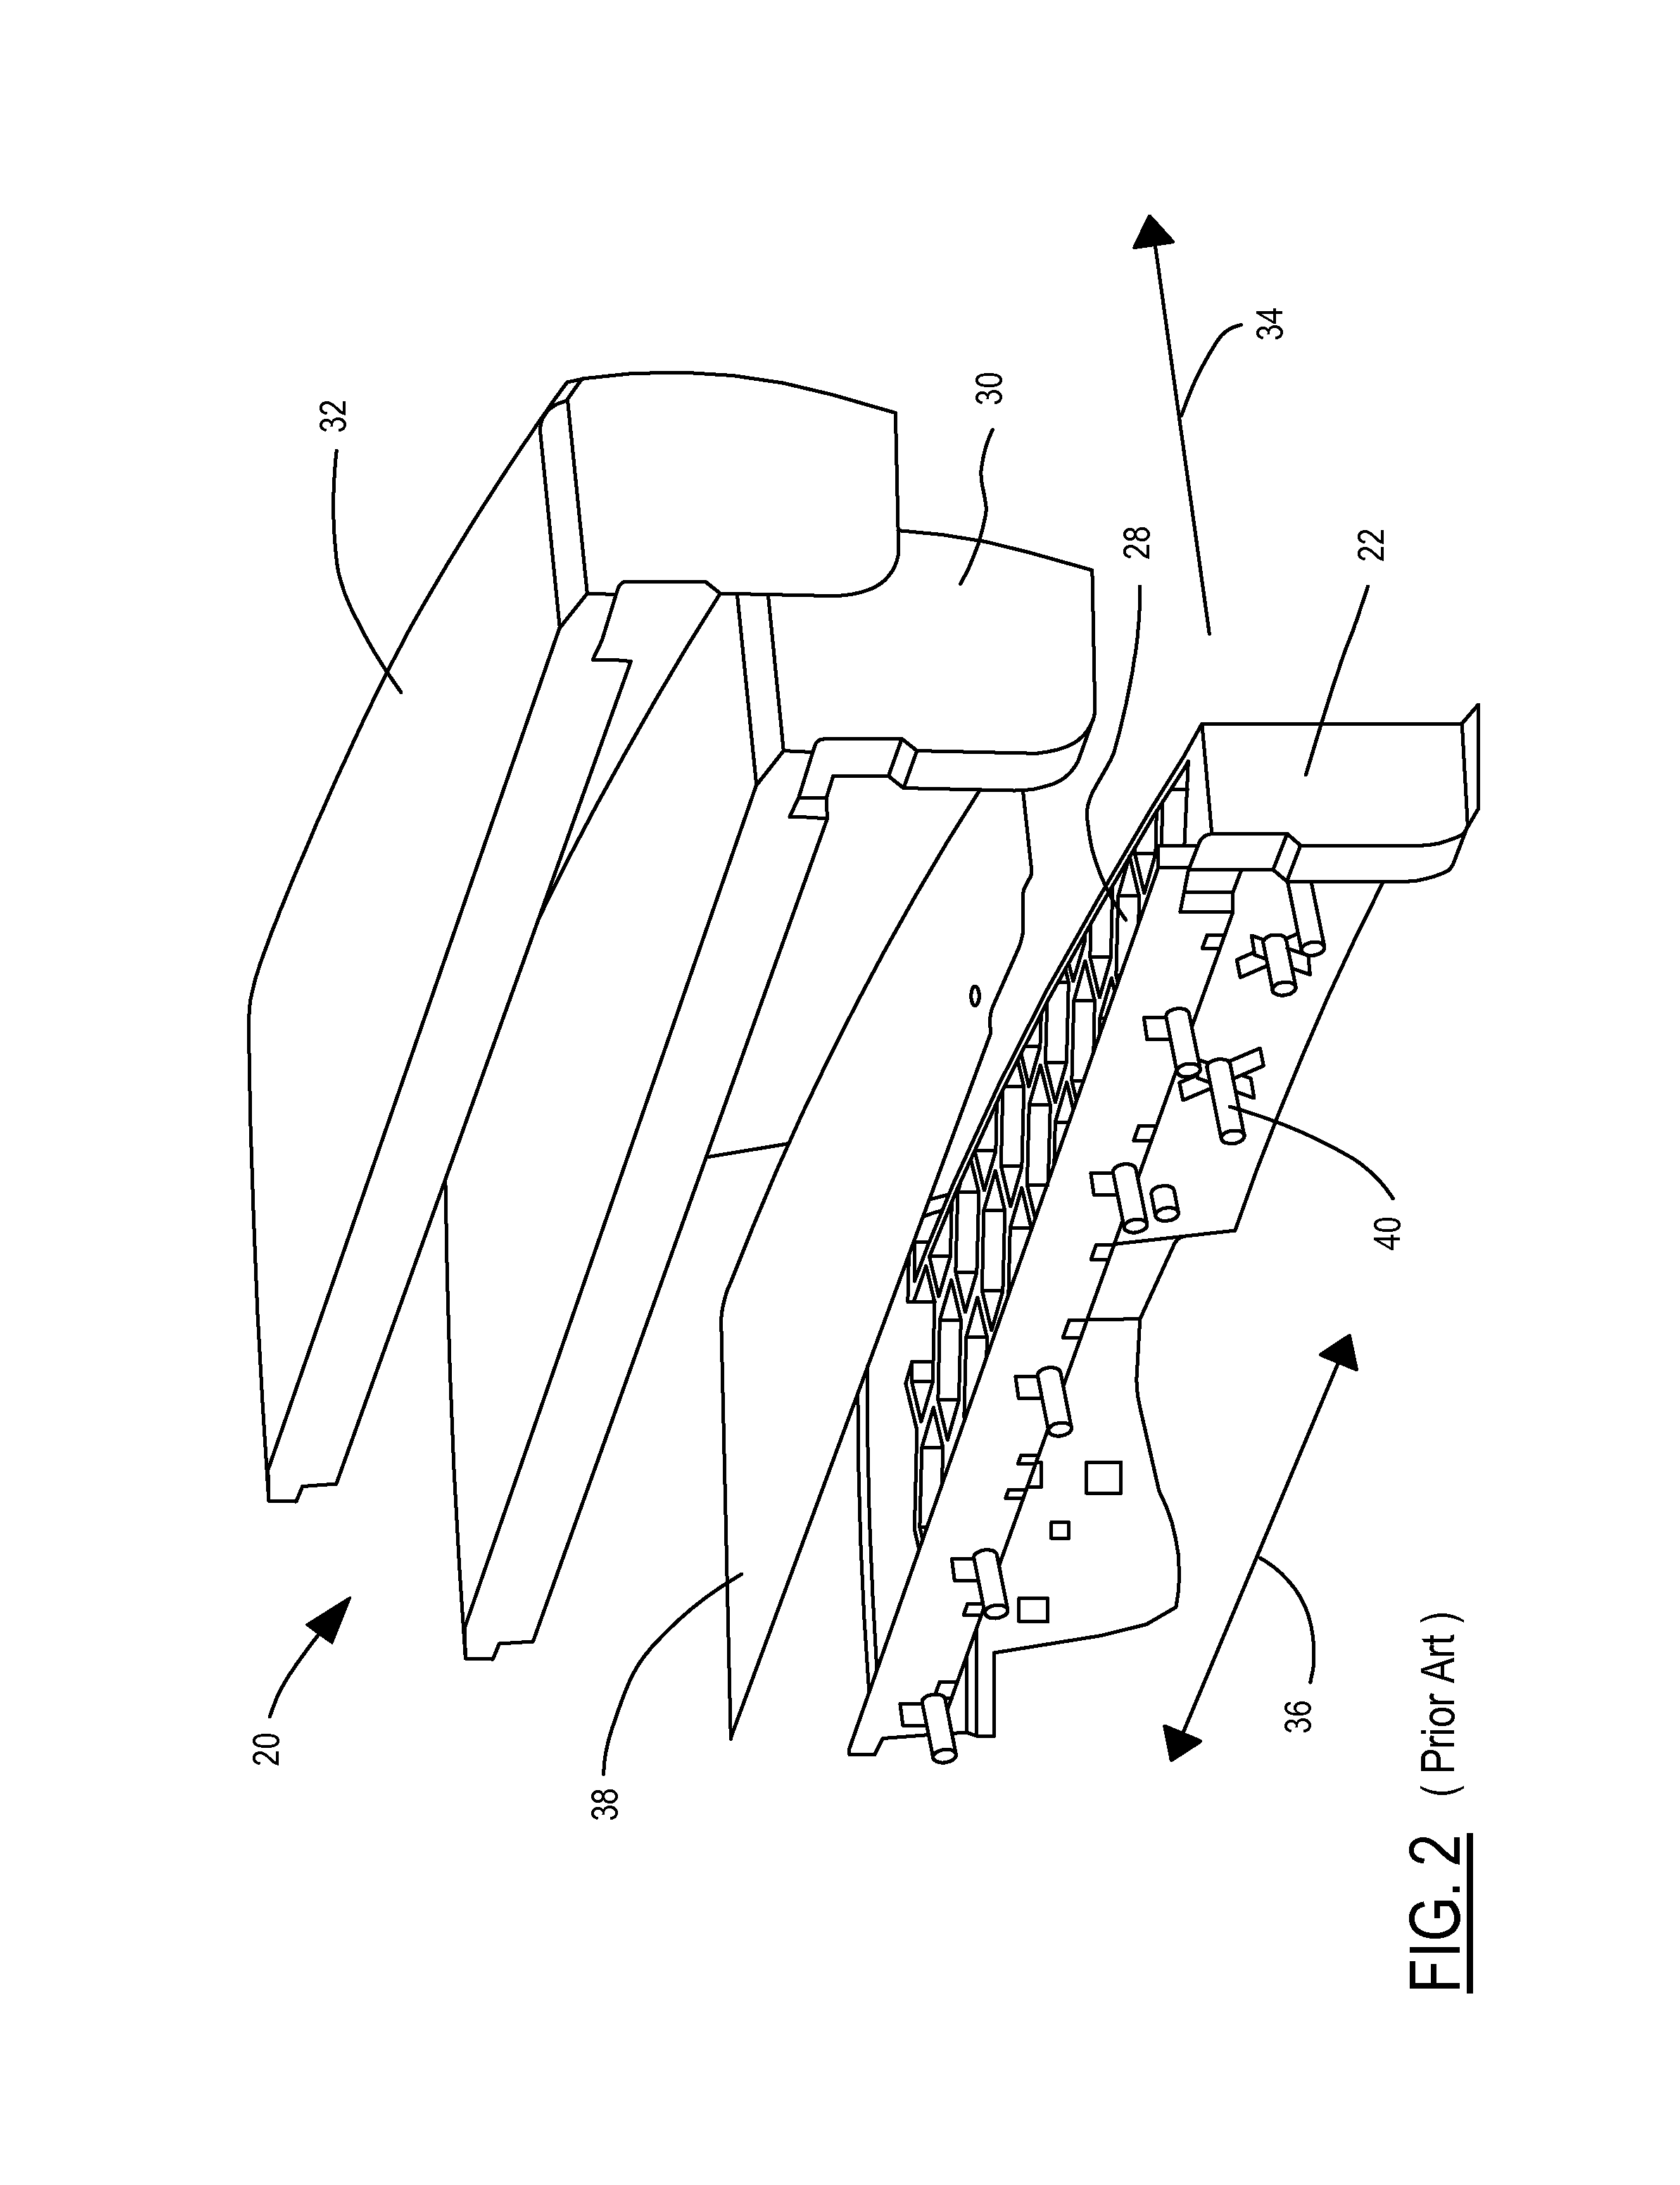 Thin plate structural support for a motor vehicle armrest